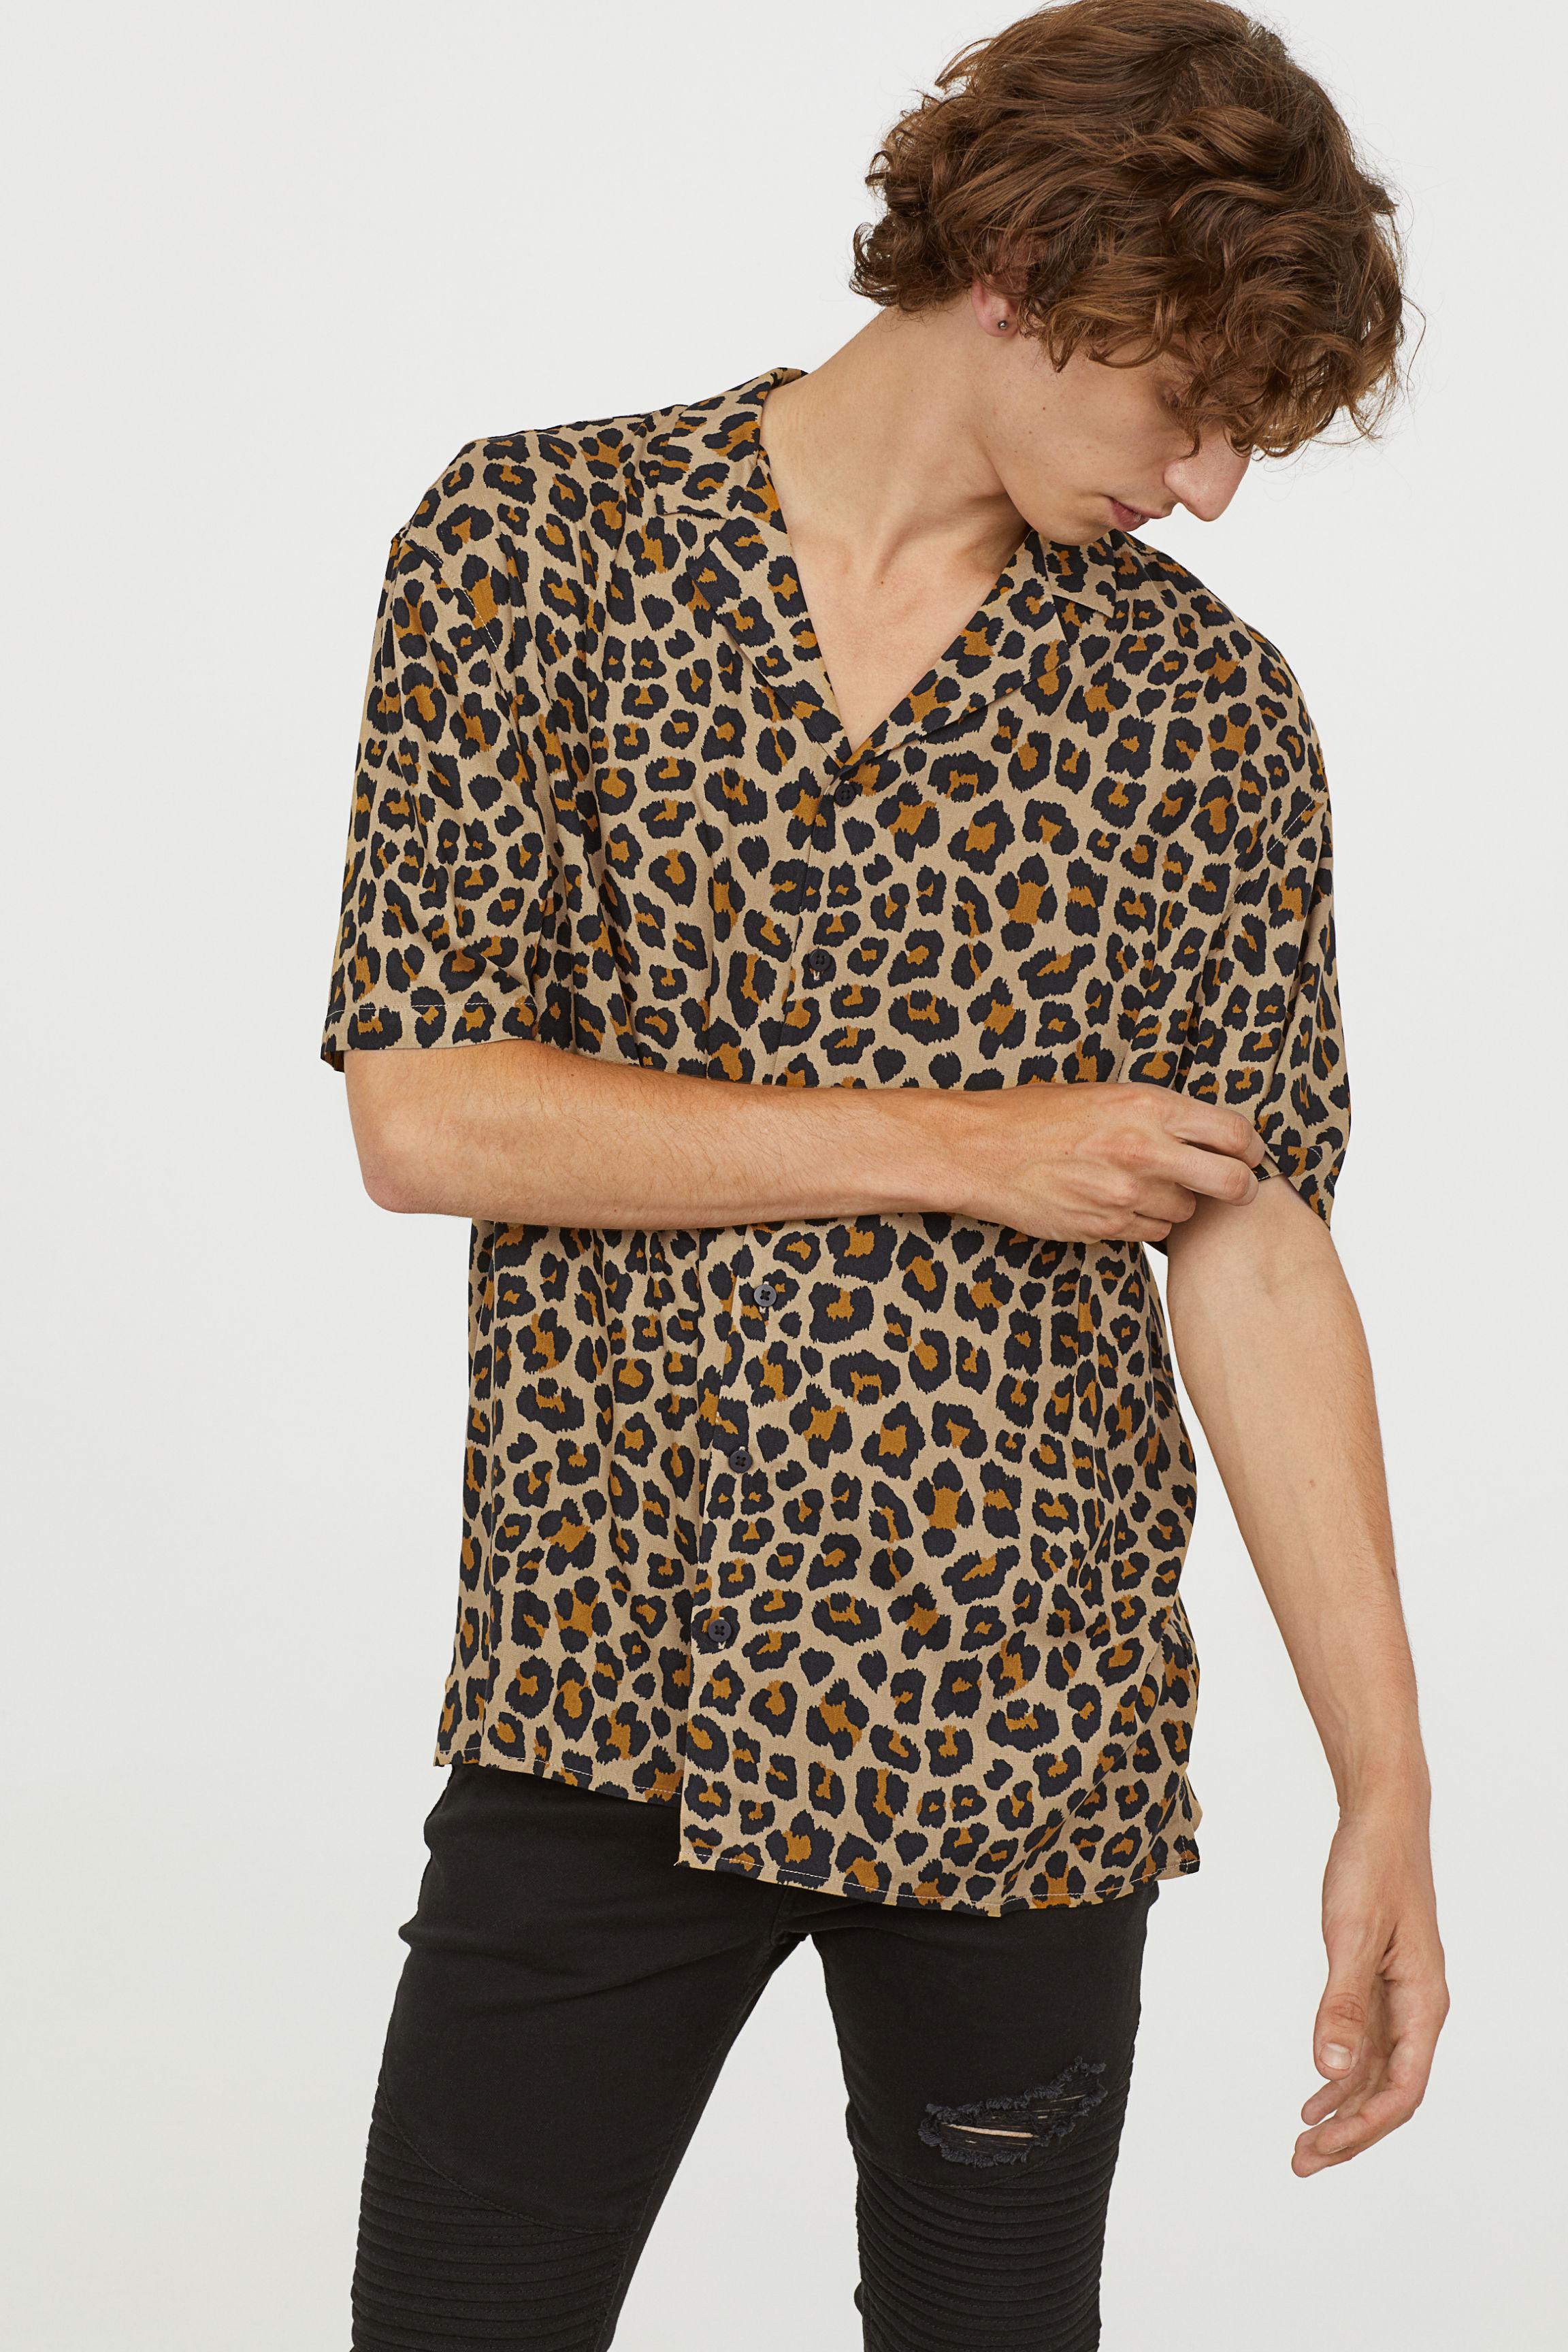 H&M Synthetic Patterned Resort Shirt in Beige/Leopard Print (Natural) for  Men | Lyst